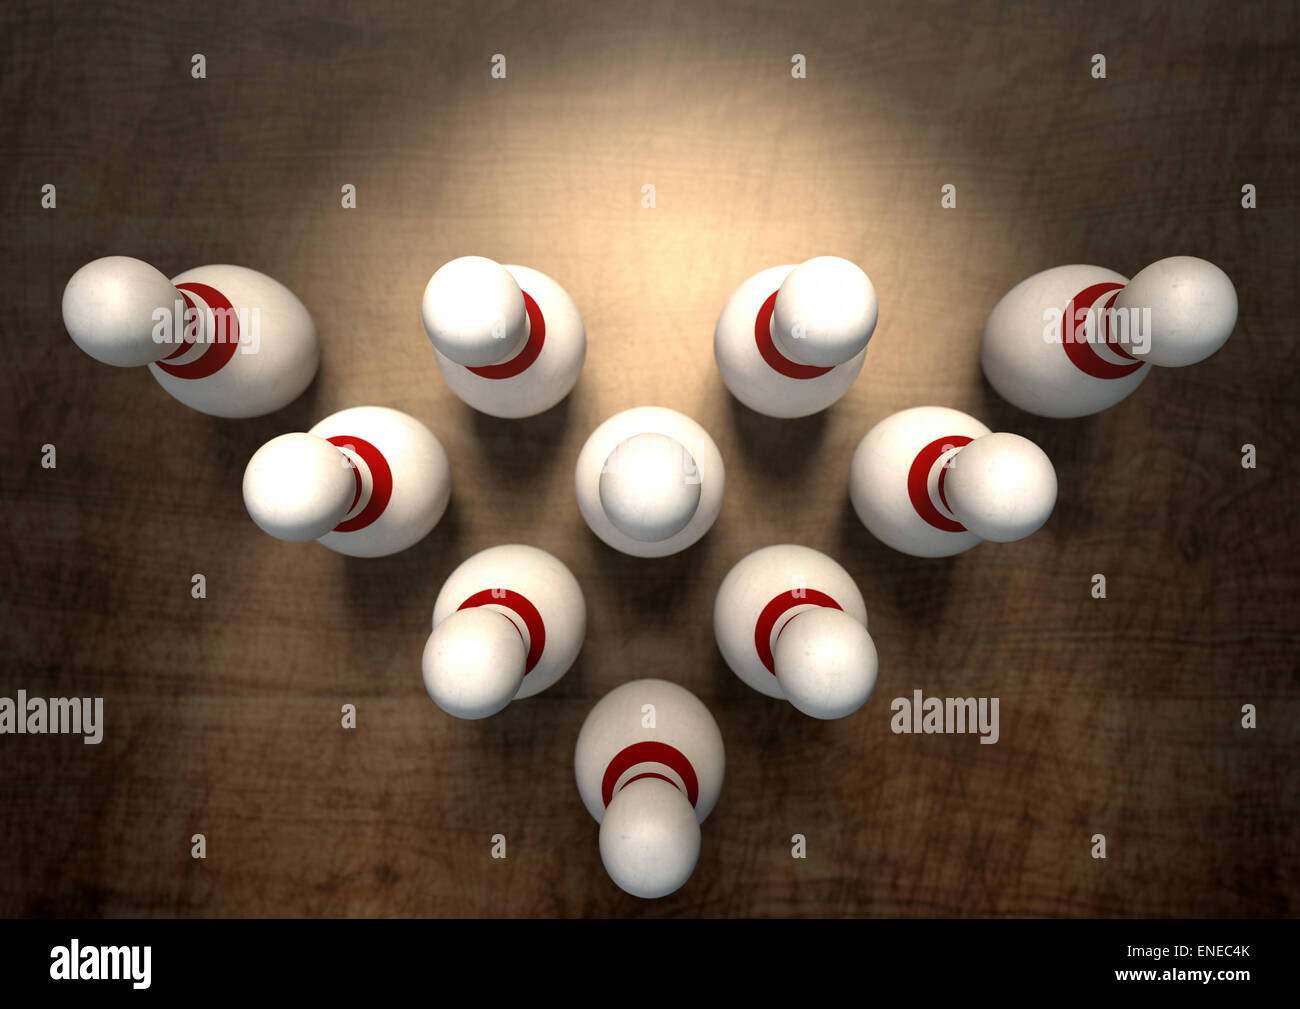 An arrangement of white and red used vintage bowling pins resting on a  wooden bowling alley surface on a dark background Stock Photo - Alamy